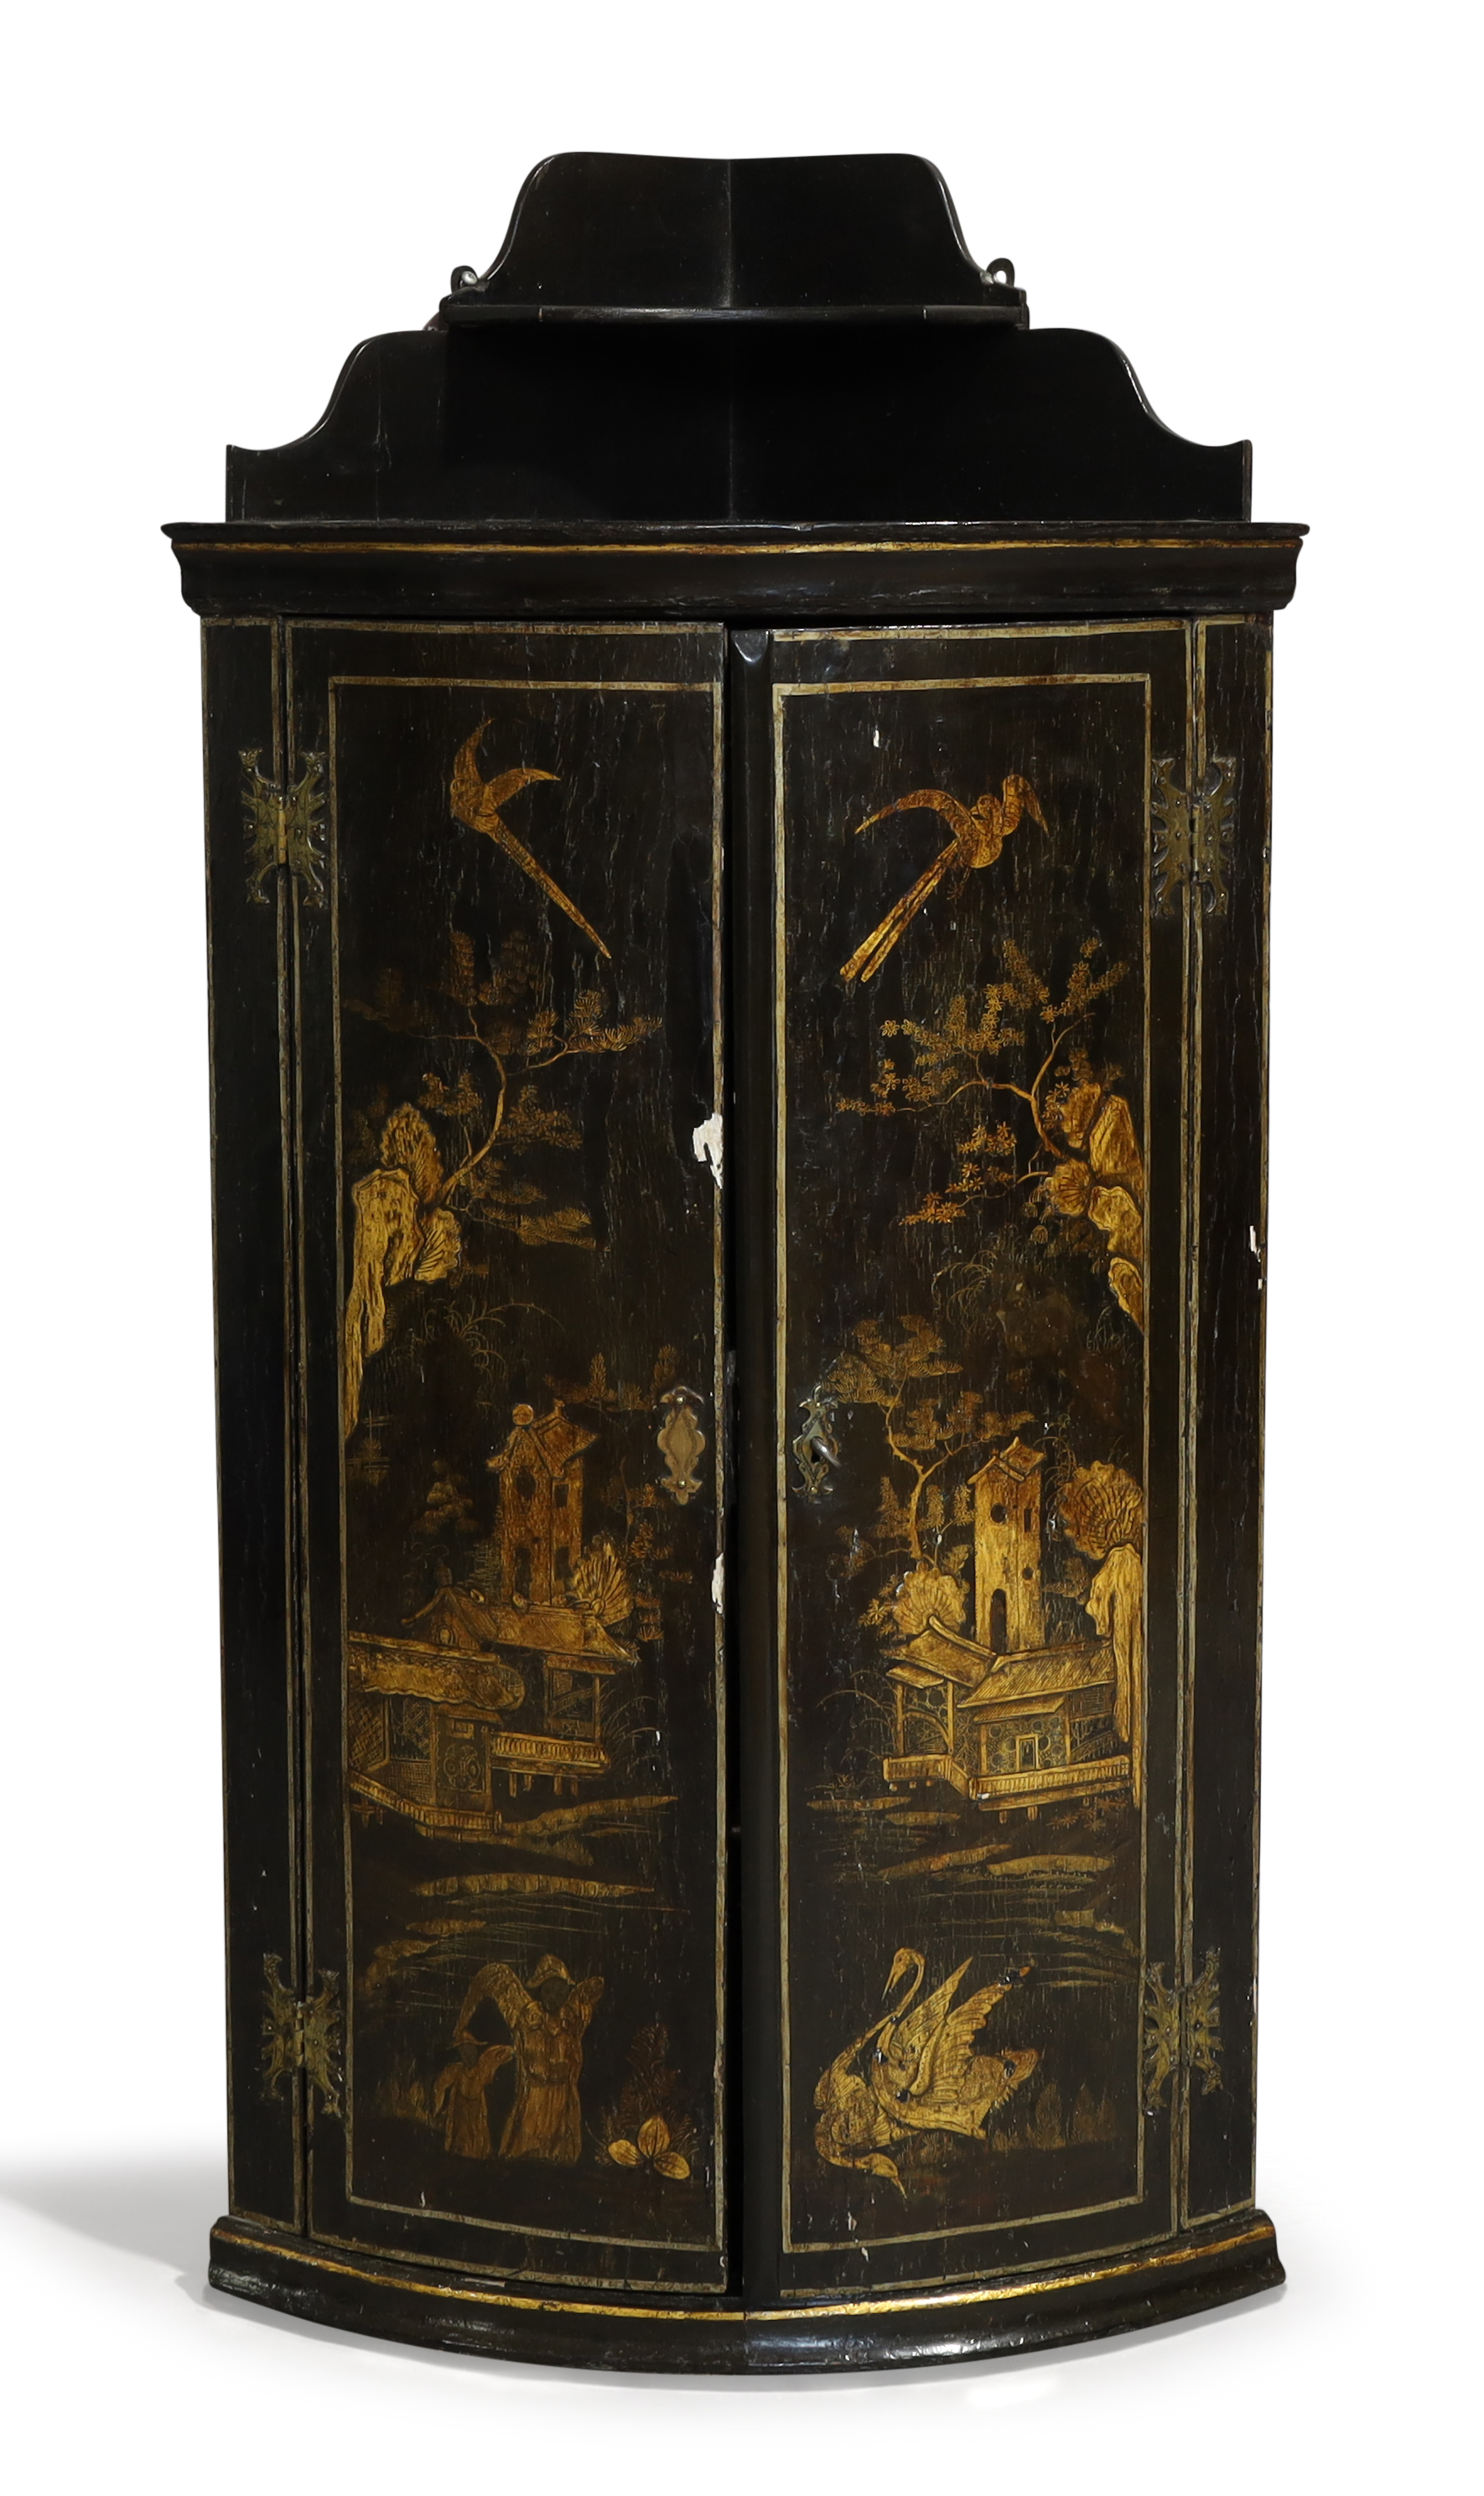 A Queen Anne black japanned bowfront hanging corner cupboard